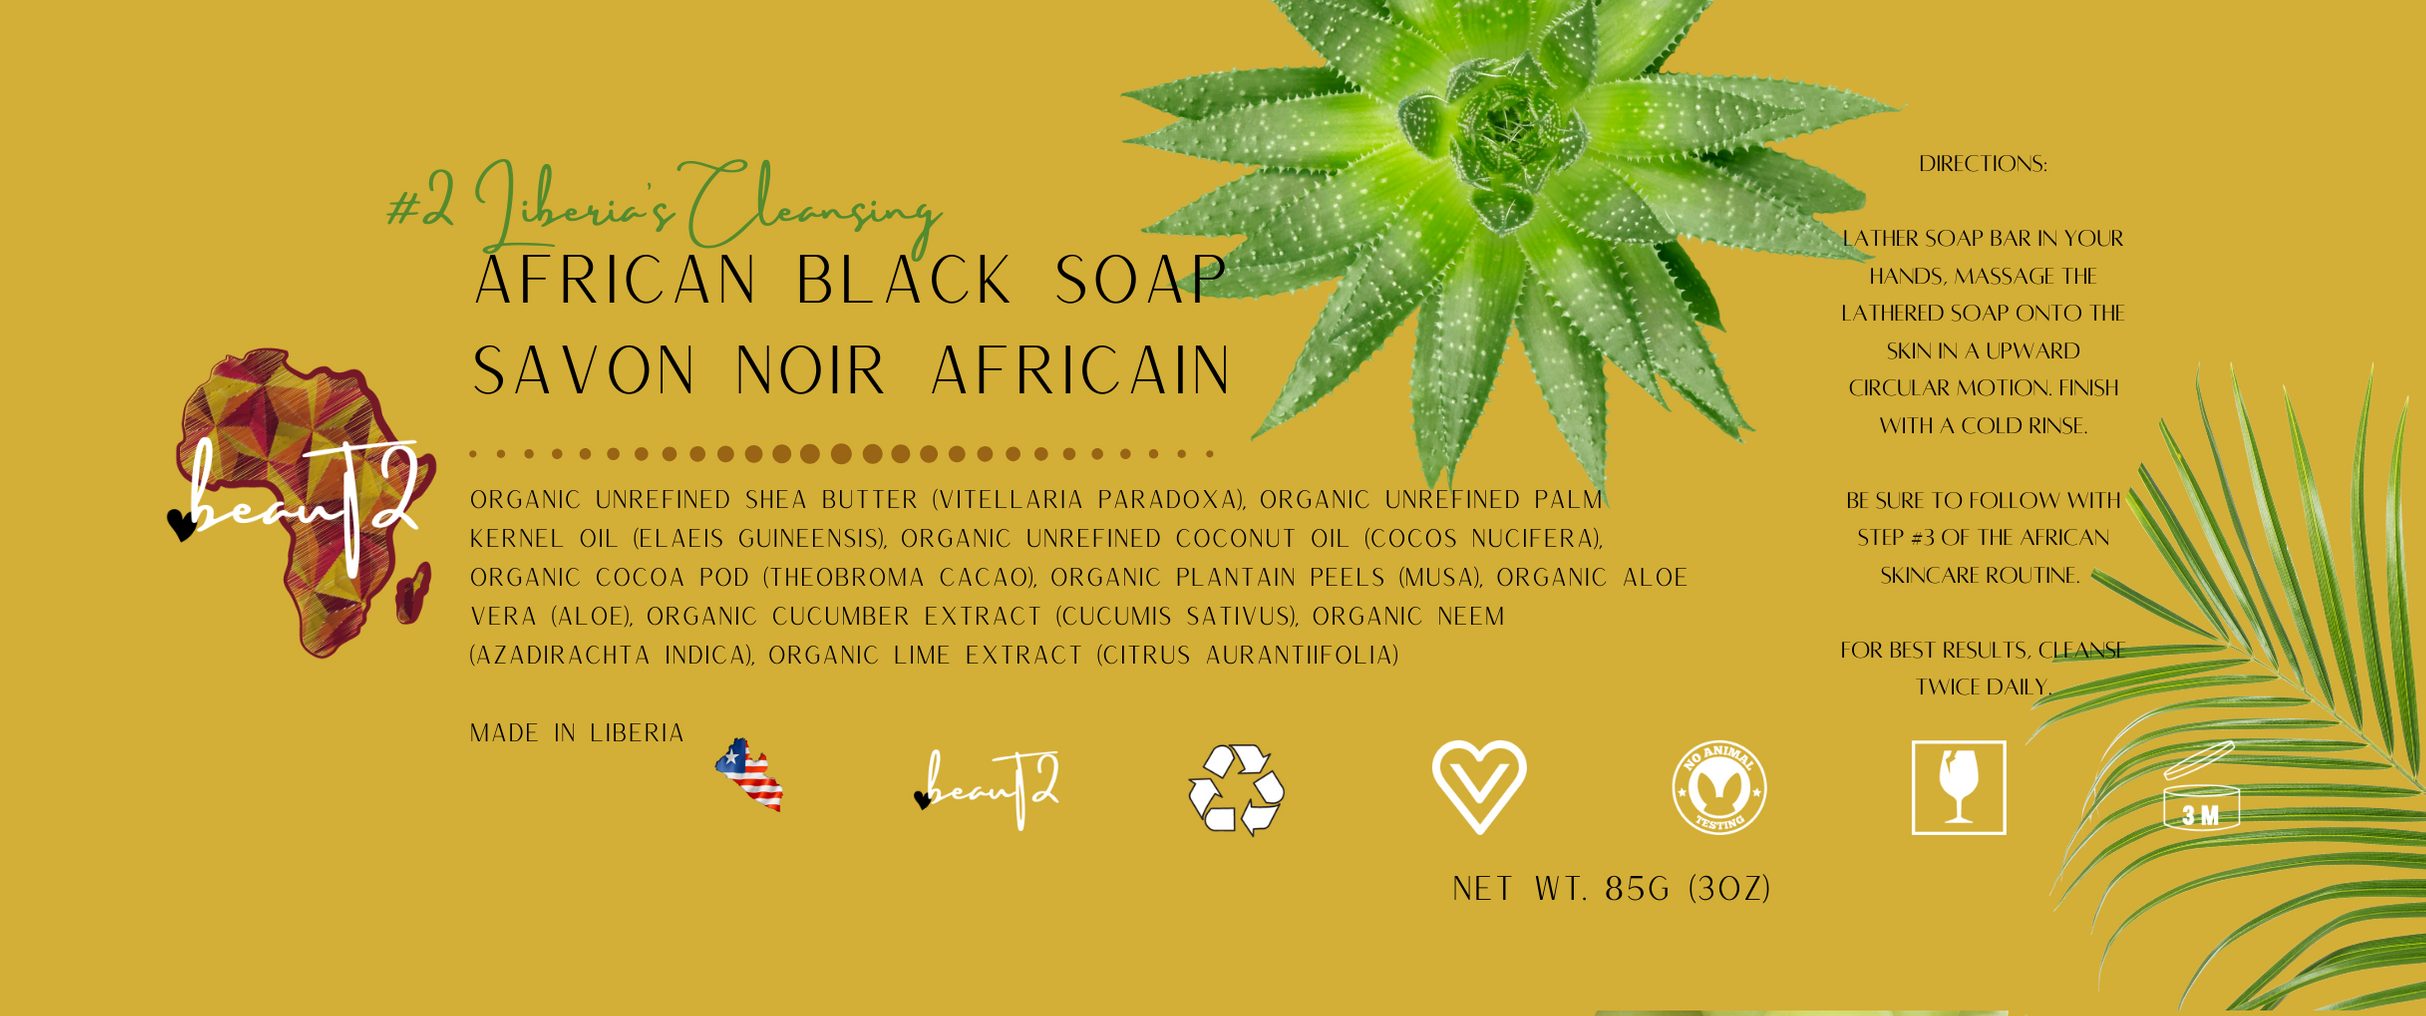 Liberia’s Cleansing African Black Soap